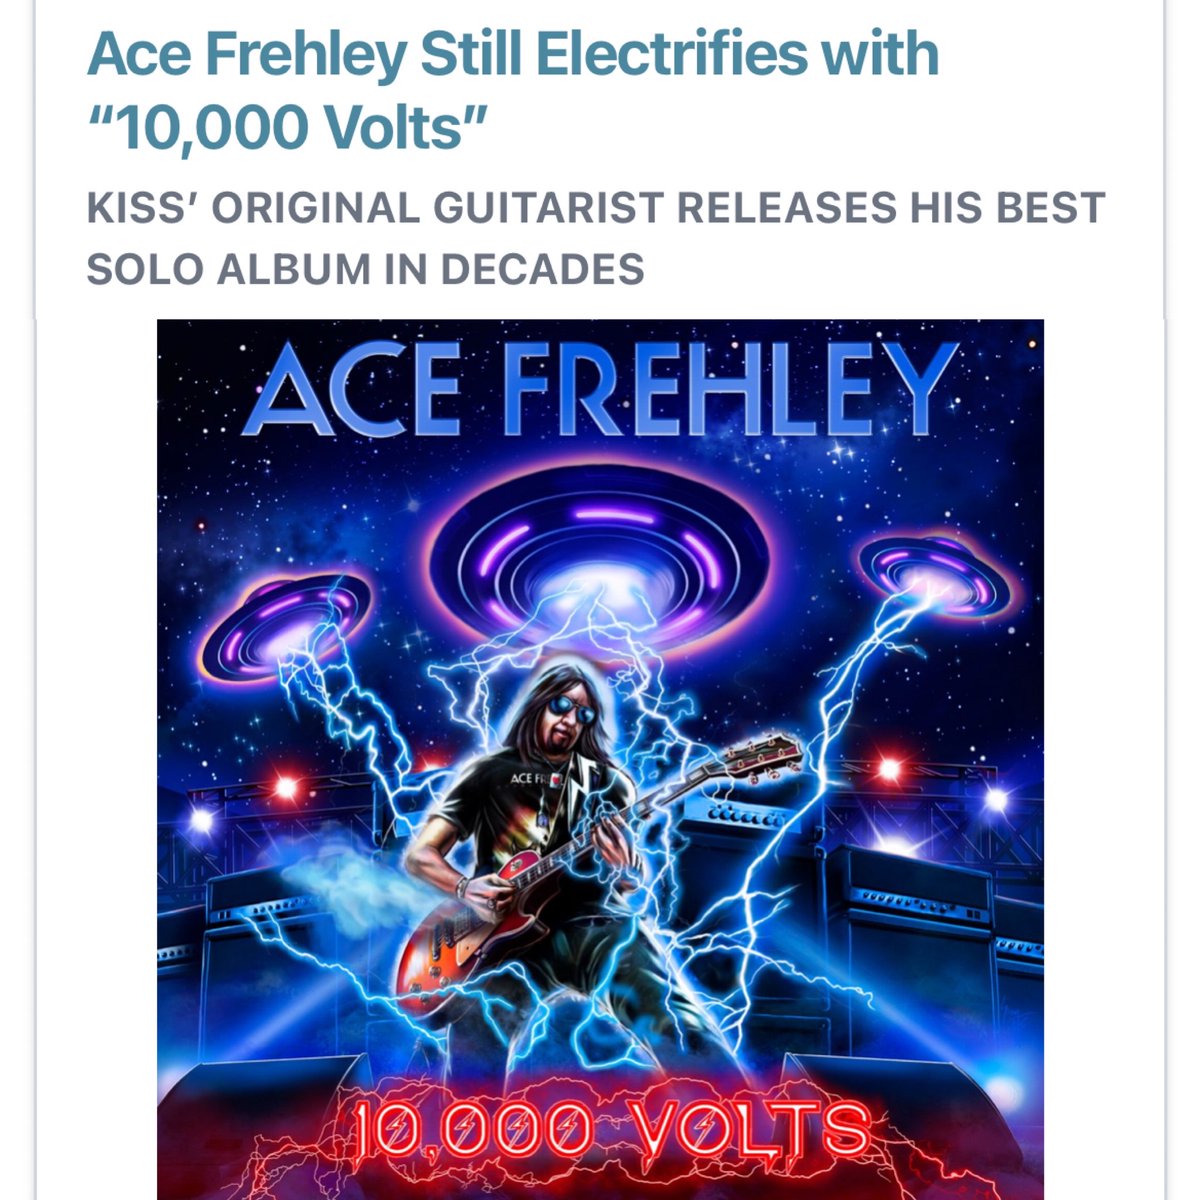 My written review of Ace Frehley’s “10,000 Volts” is up on @tracking_angle ! When it comes to writing about anything KISS related, the creative juices never run dry. Give it a read! #acefrehley #10000volts #albumreview trackingangle.com/music/ace-freh…